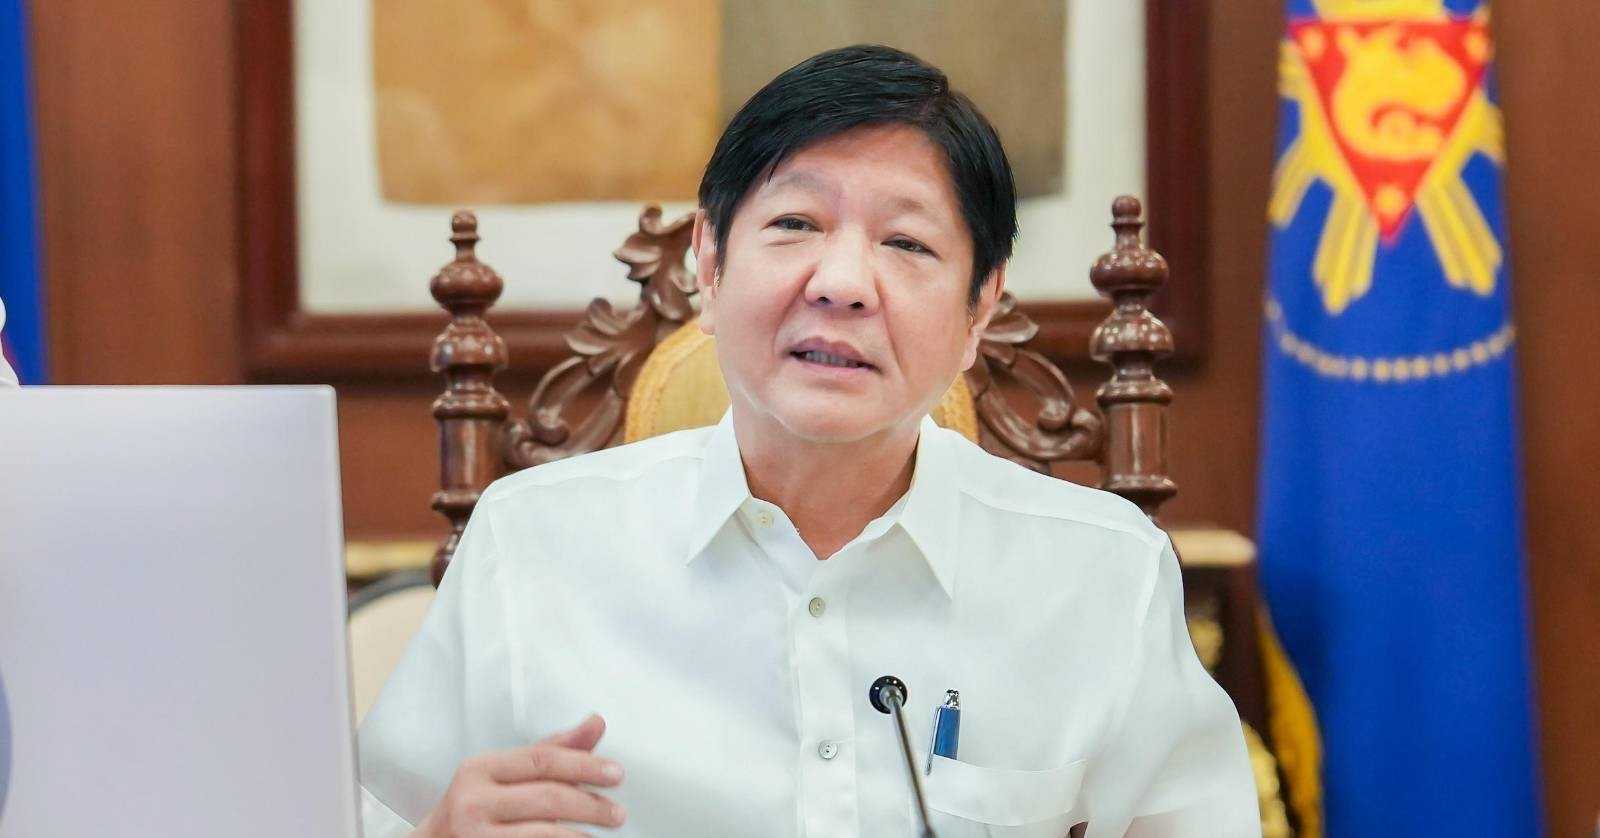 Marcos' wish on his 66th birthday: "A better state of agriculture in PH"